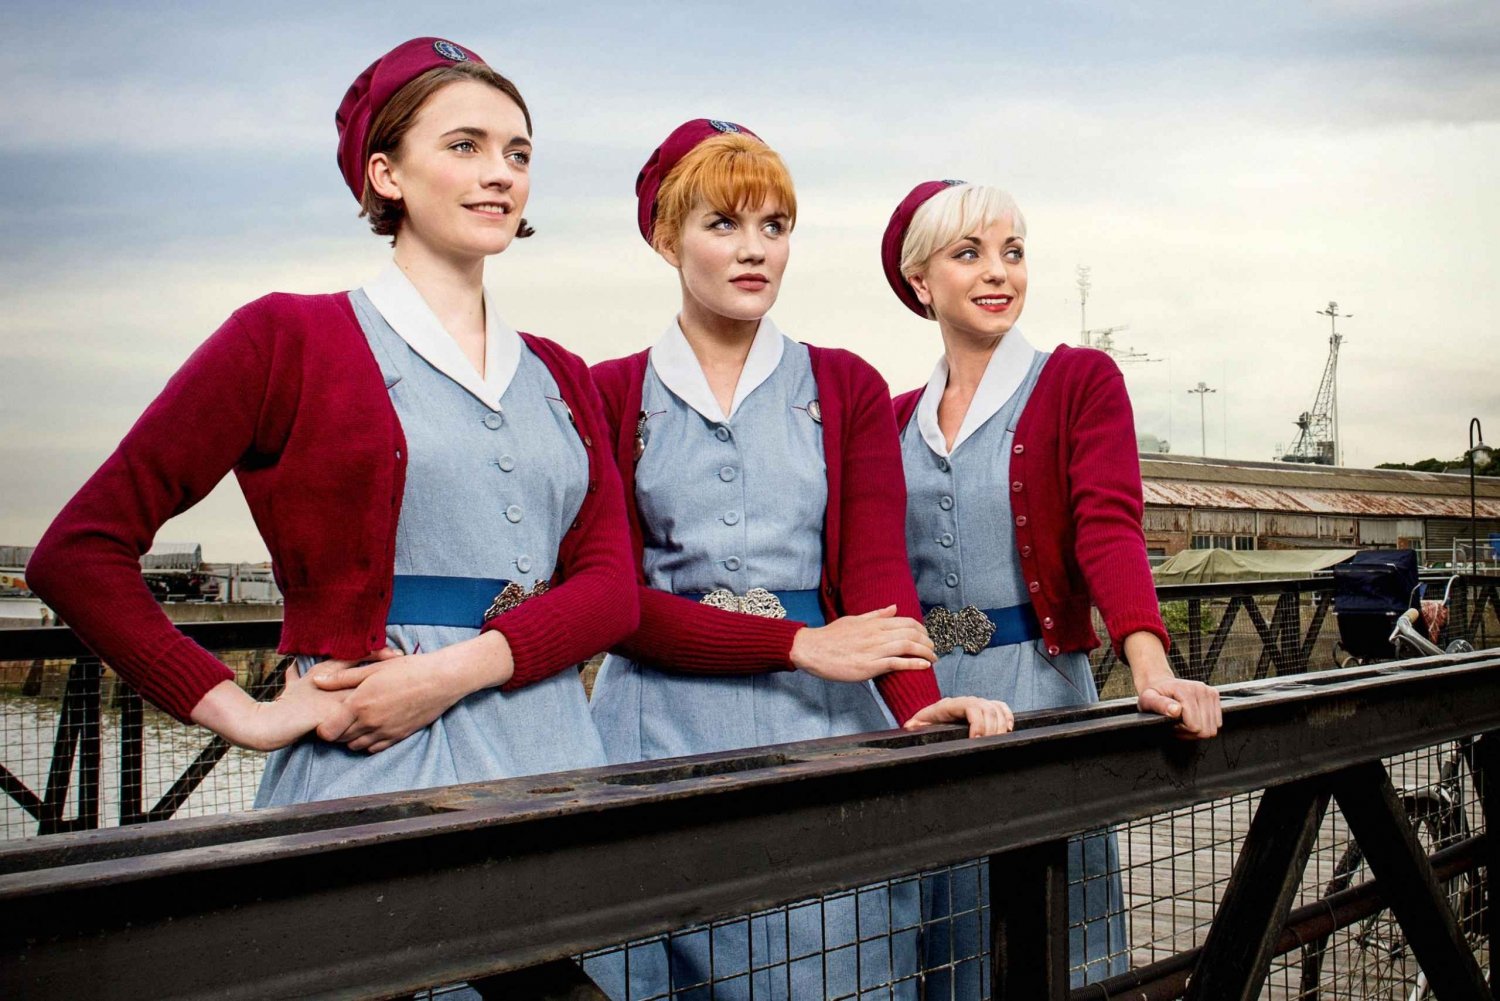 Chatham Historic Dockyard: Tour 'Call the Midwife